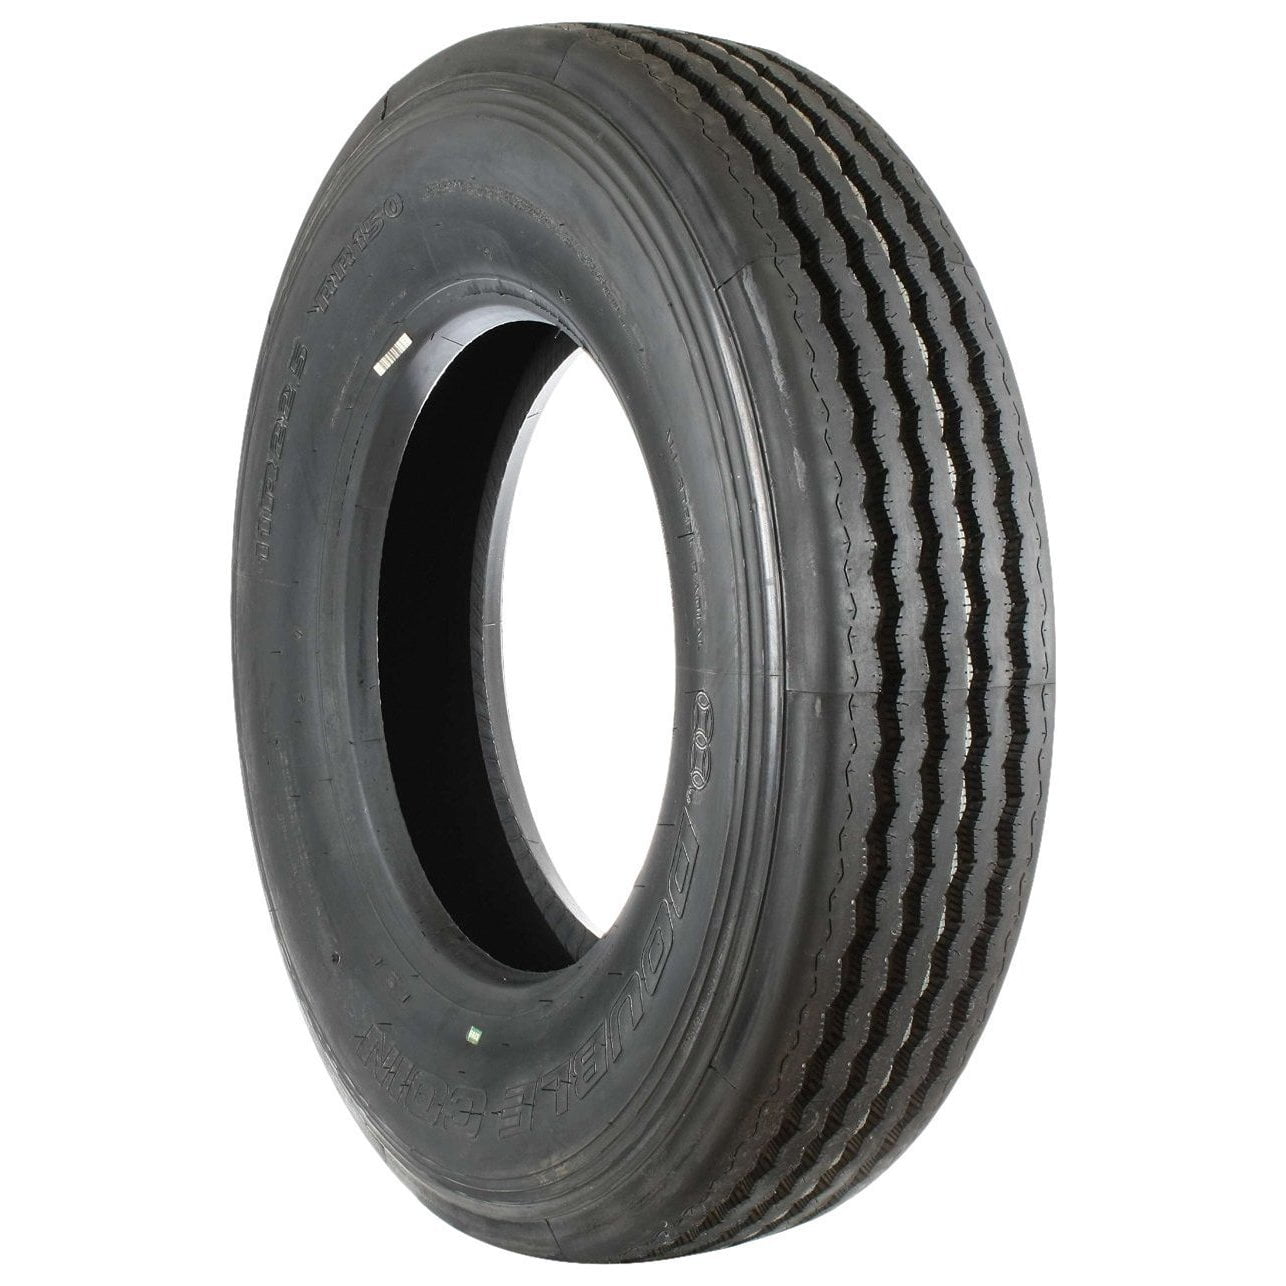 Double Coin RLB400 Commercial Truck Radial Tire-28575R24.5 144J 